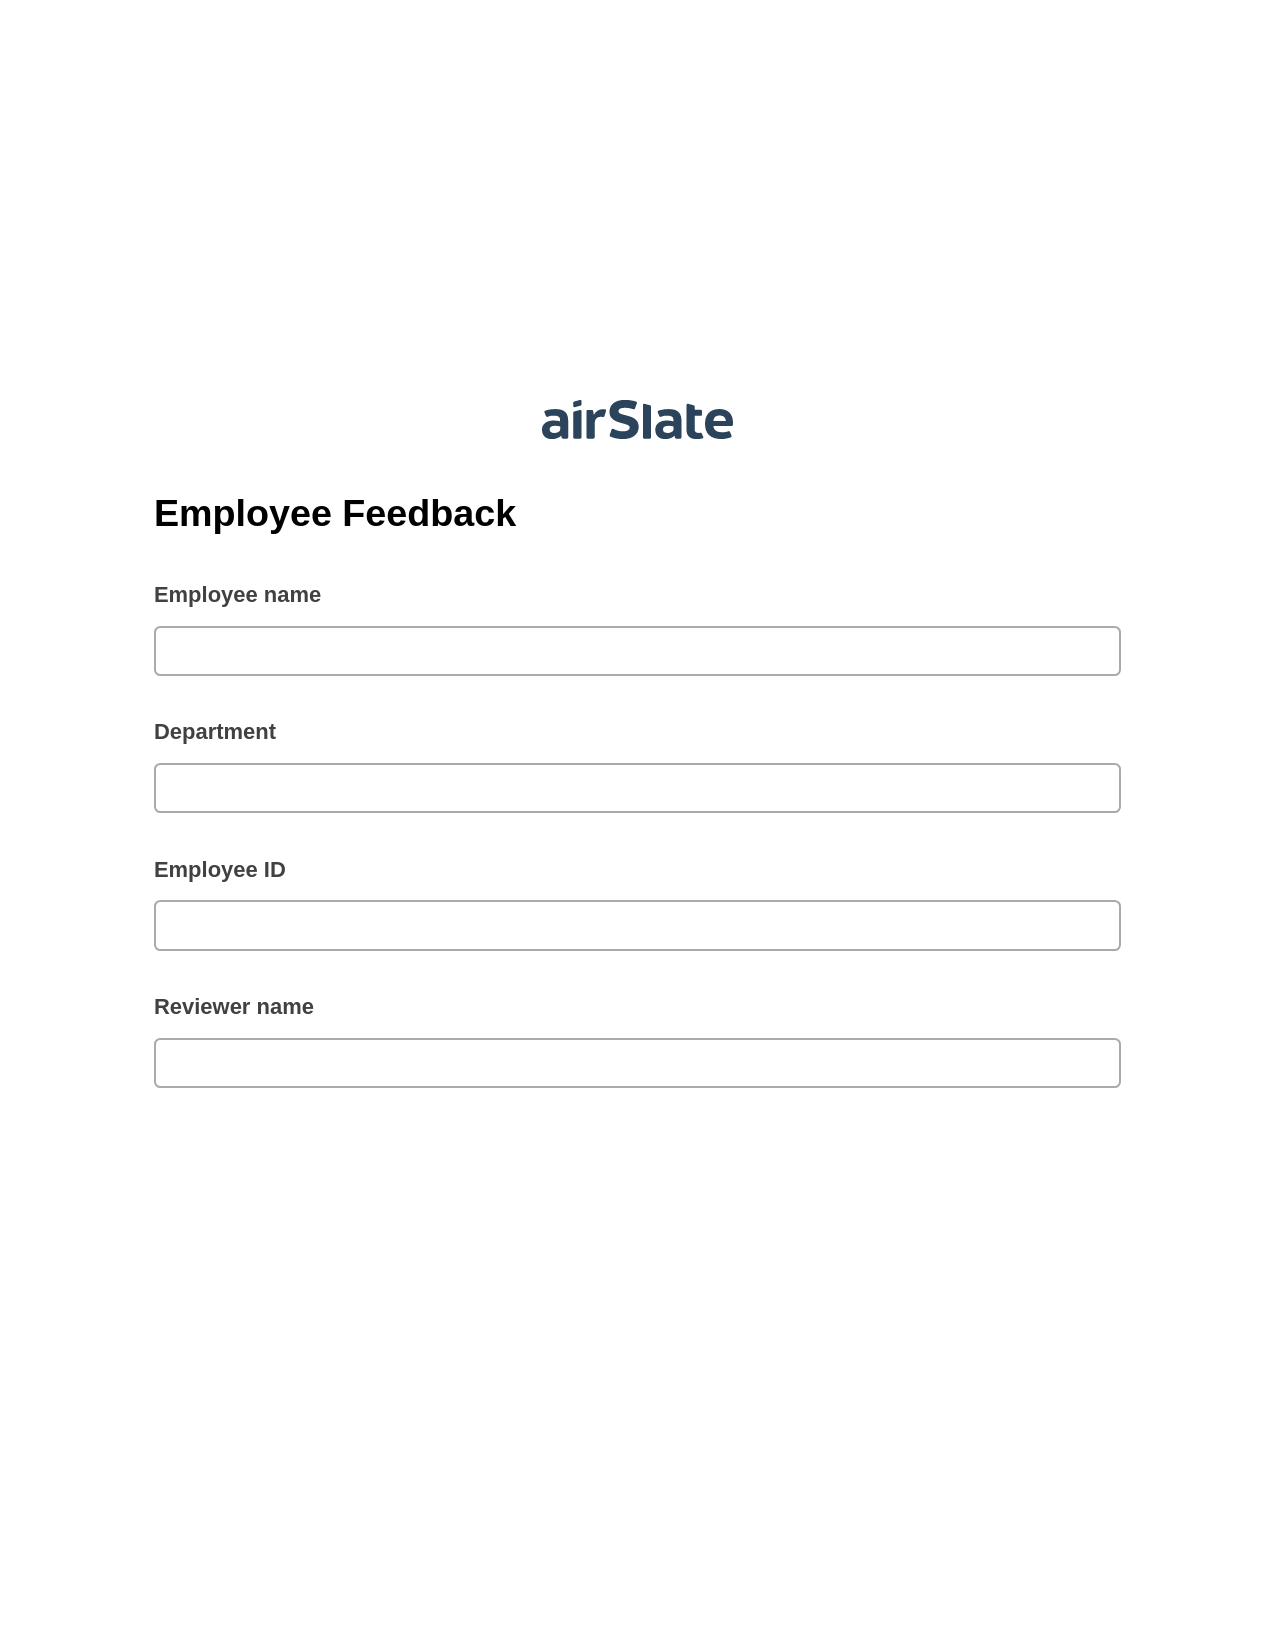 Employee Feedback Pre-fill from MySQL Bot, Send a Slate with Roles Bot, Export to Smartsheet